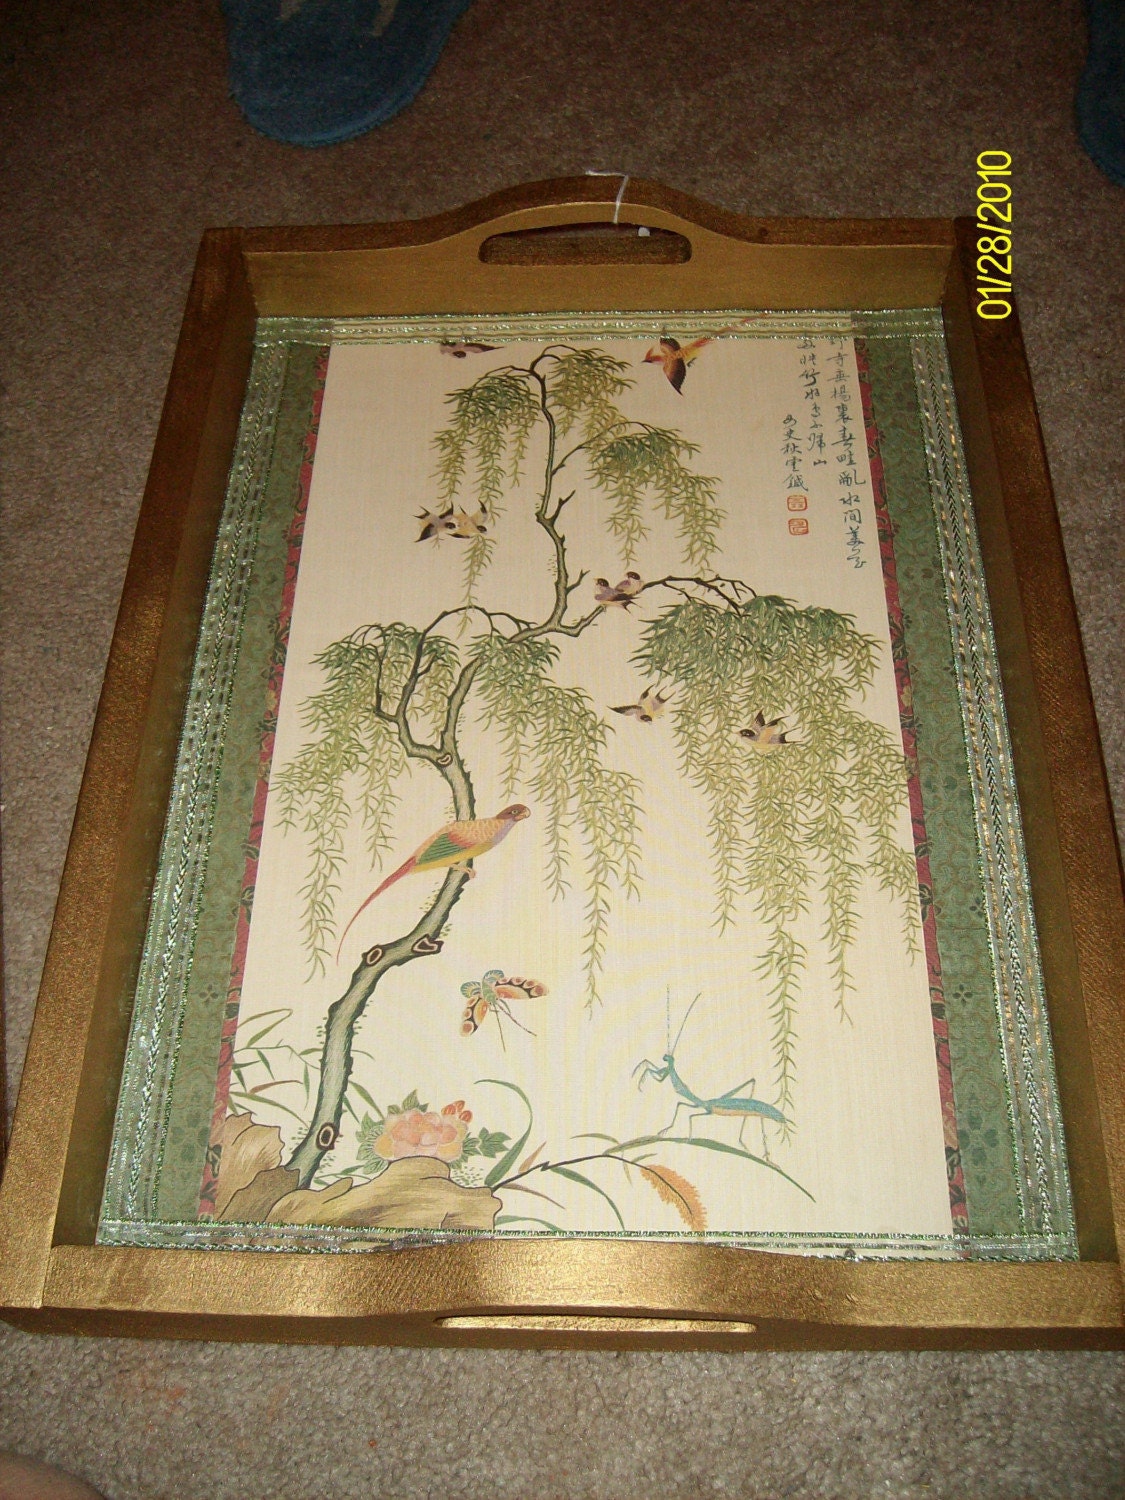 This is a beautiful wooden tray that has been painted gold and has an oriental design wallpaper on the bottom. I bought this tray at a yard sale and painted 